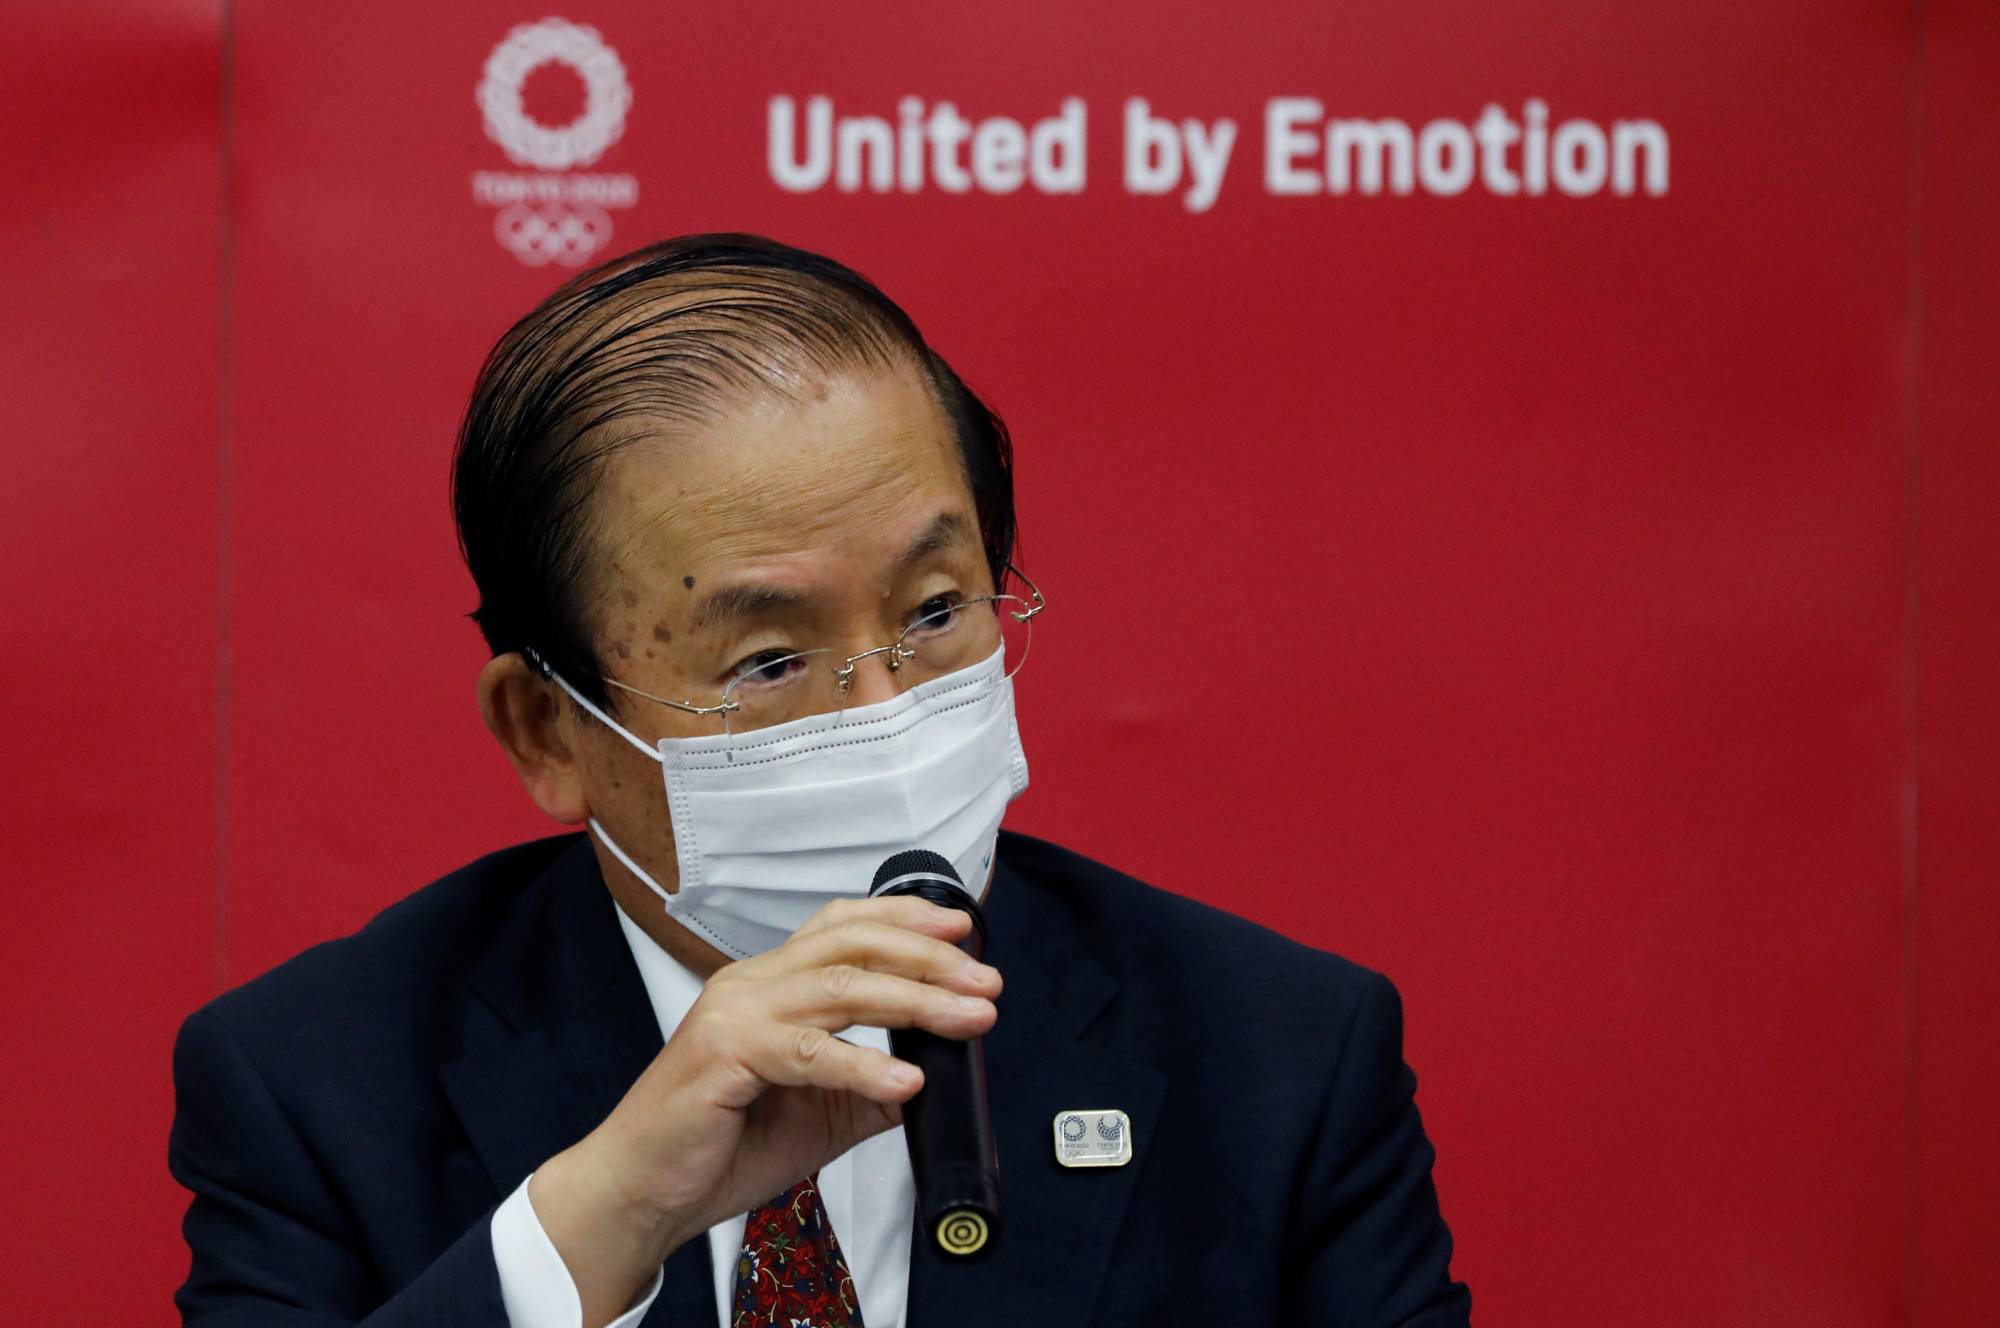 Tokyo 2020 Organising Committee CEO Toshiro Muto speaks at a news conference after an IOC board meeting, in Tokyo on Thursday. | POOL / VIA REUTERS